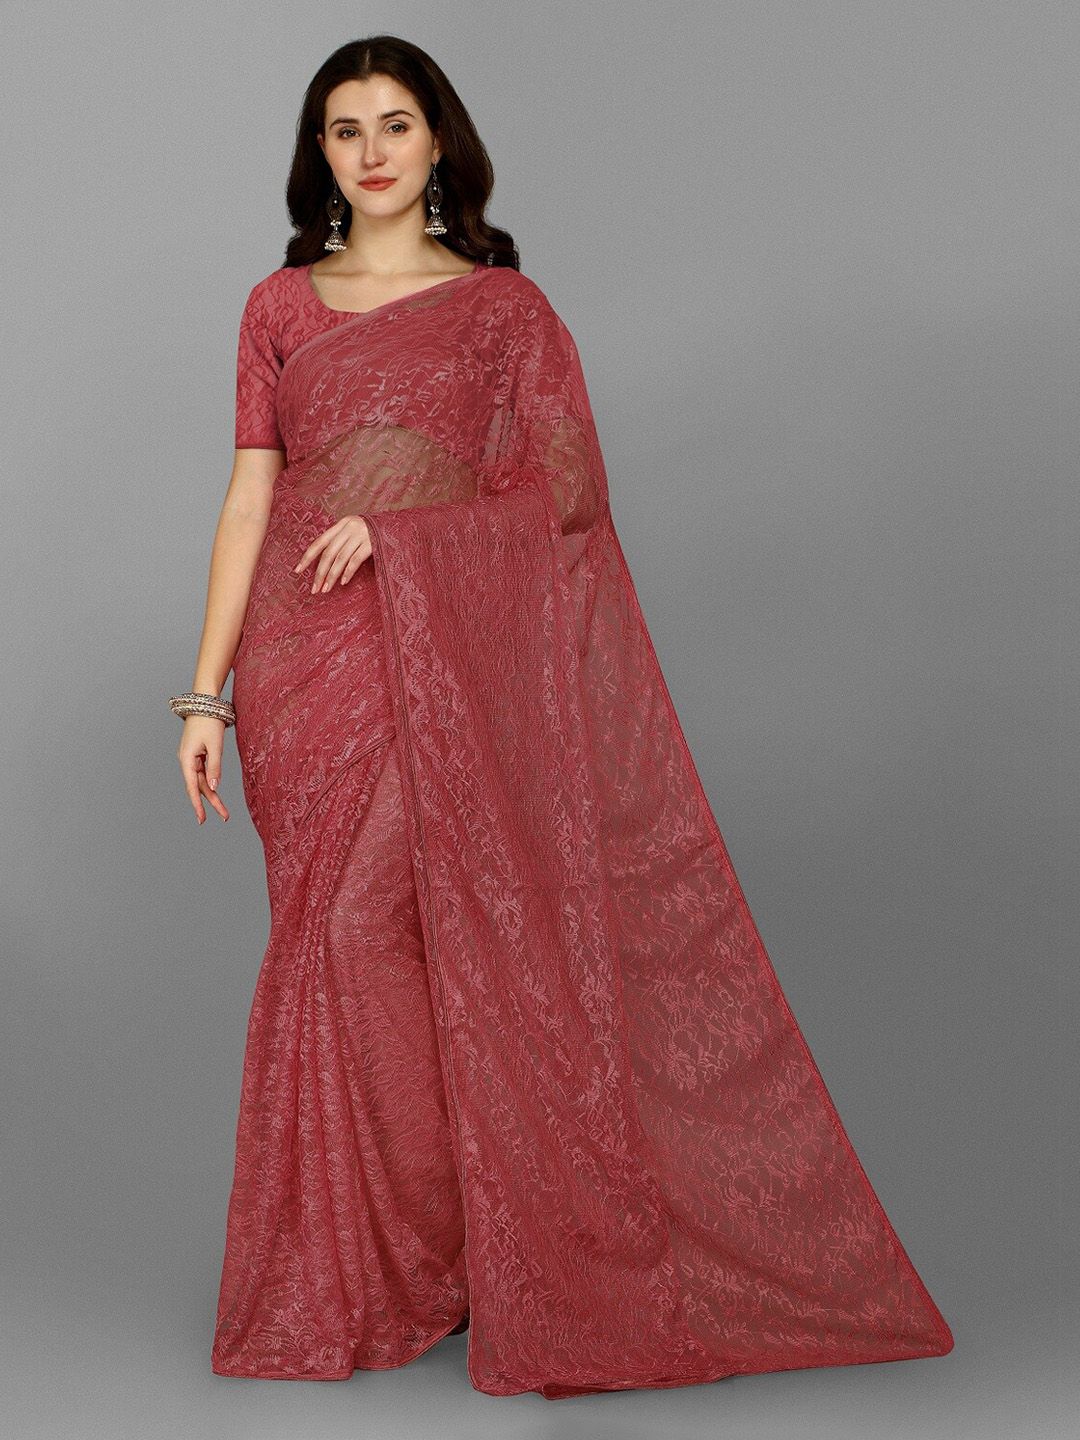 Fashion Basket Rust Red Floral Design Net Saree Price in India